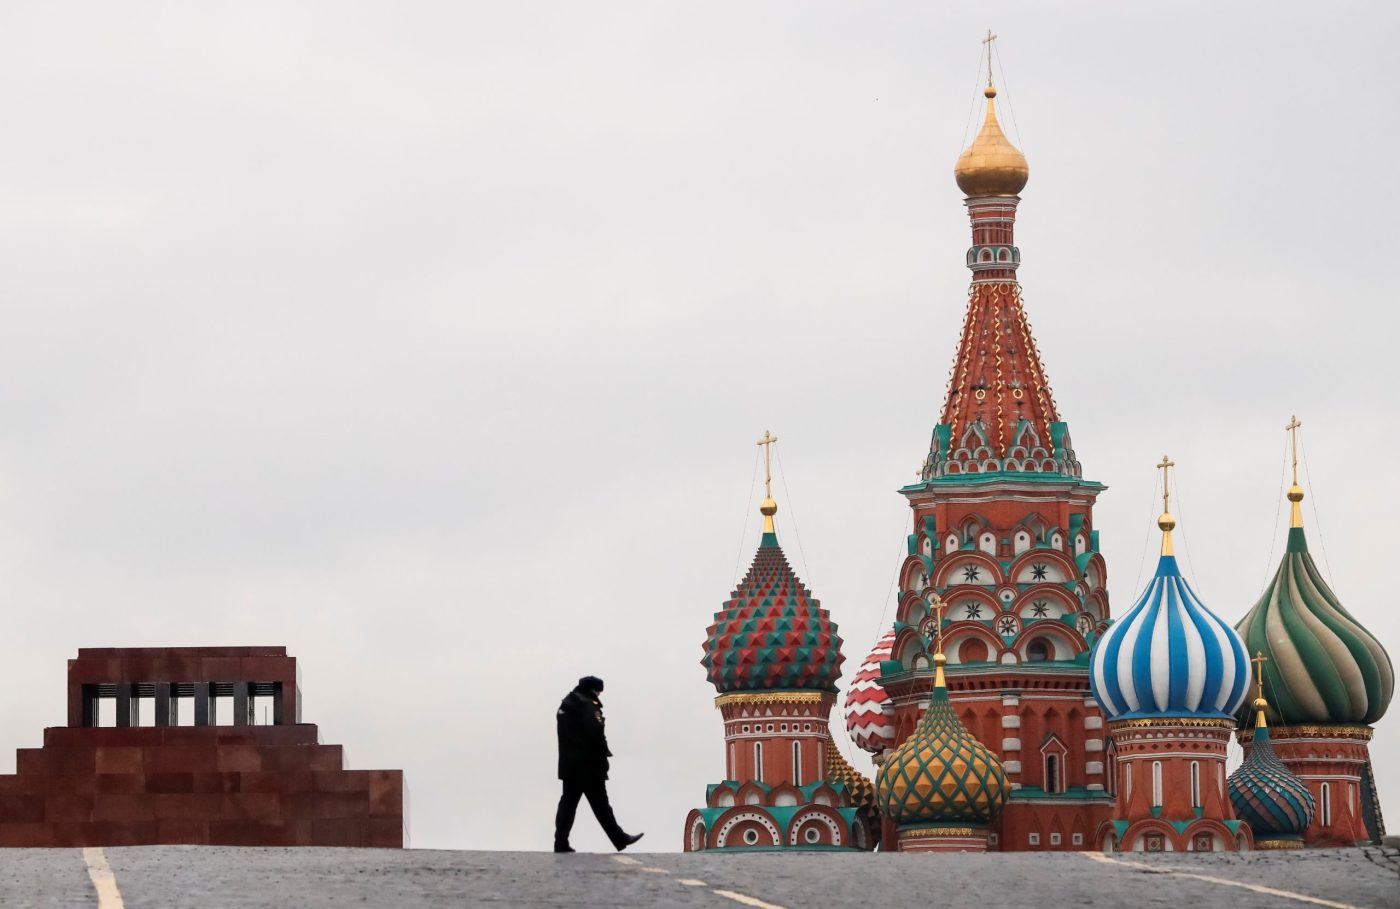 Photo: A police officer walks along the Red Square, with St. Basil's Cathedral and the Mausoleum of Soviet state founder Vladimir Lenin seen in the background, in Moscow, Russia November 5, 2017. Credit: REUTERS/Grigory Dukor